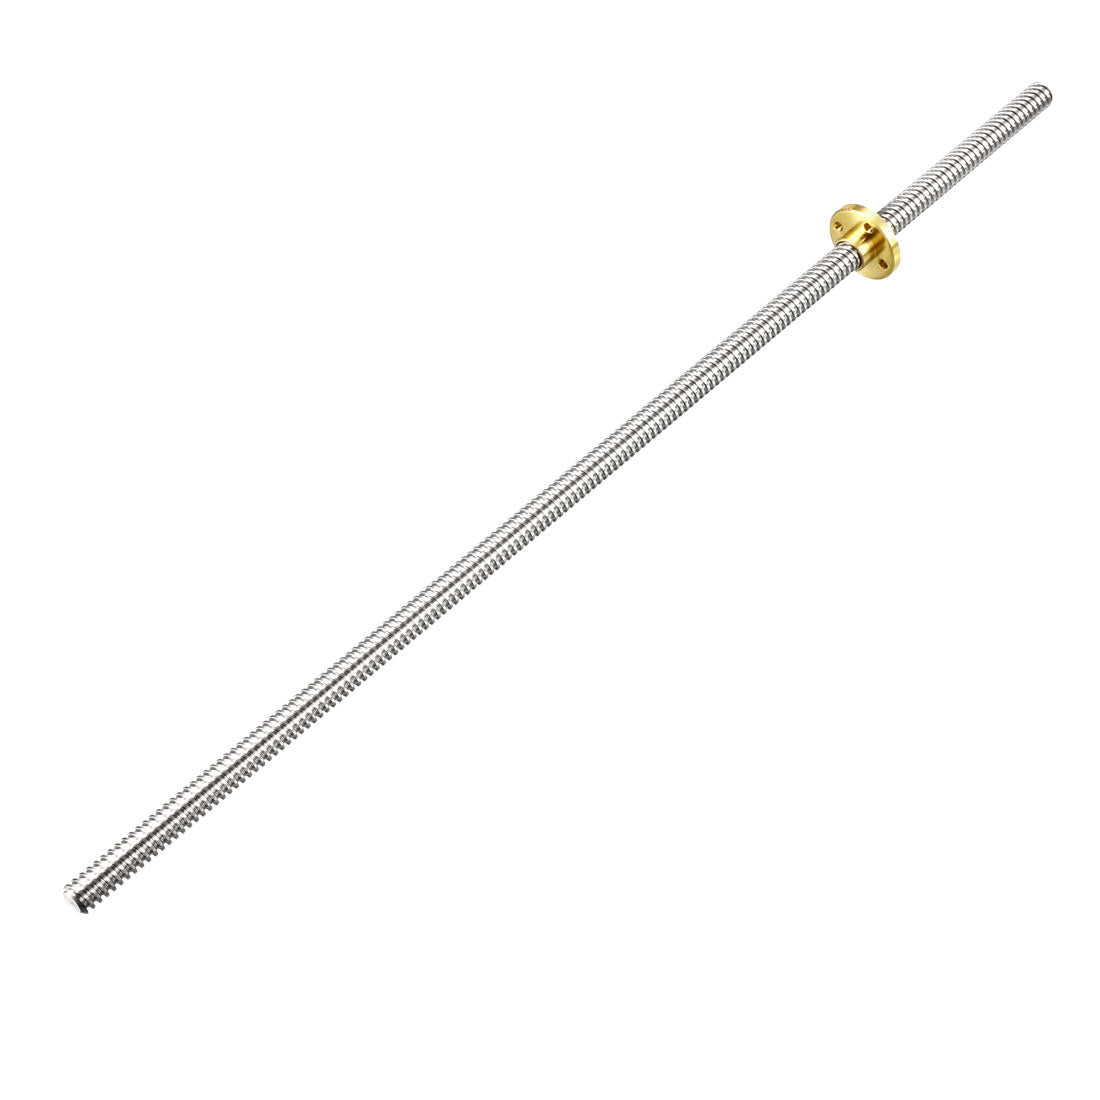 uxcell Uxcell 350mm T8 Pitch 2mm Lead 2mm Lead Screw Rod with Copper Nut for 3D Printer